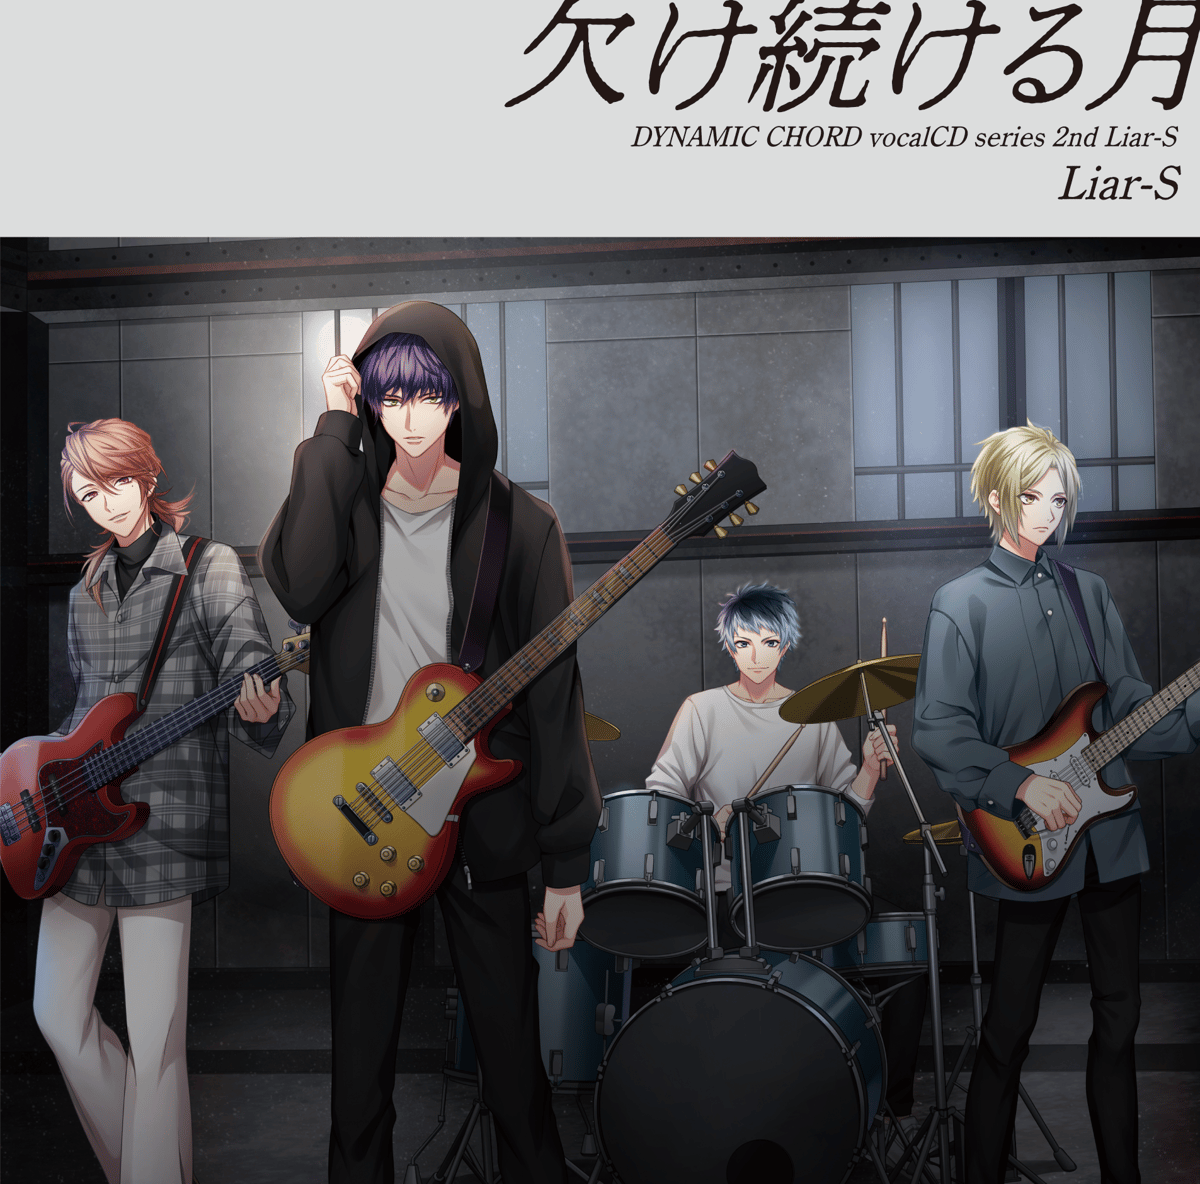 DYNAMIC CHORD vocalCD series 2nd Liar-S はにーし...